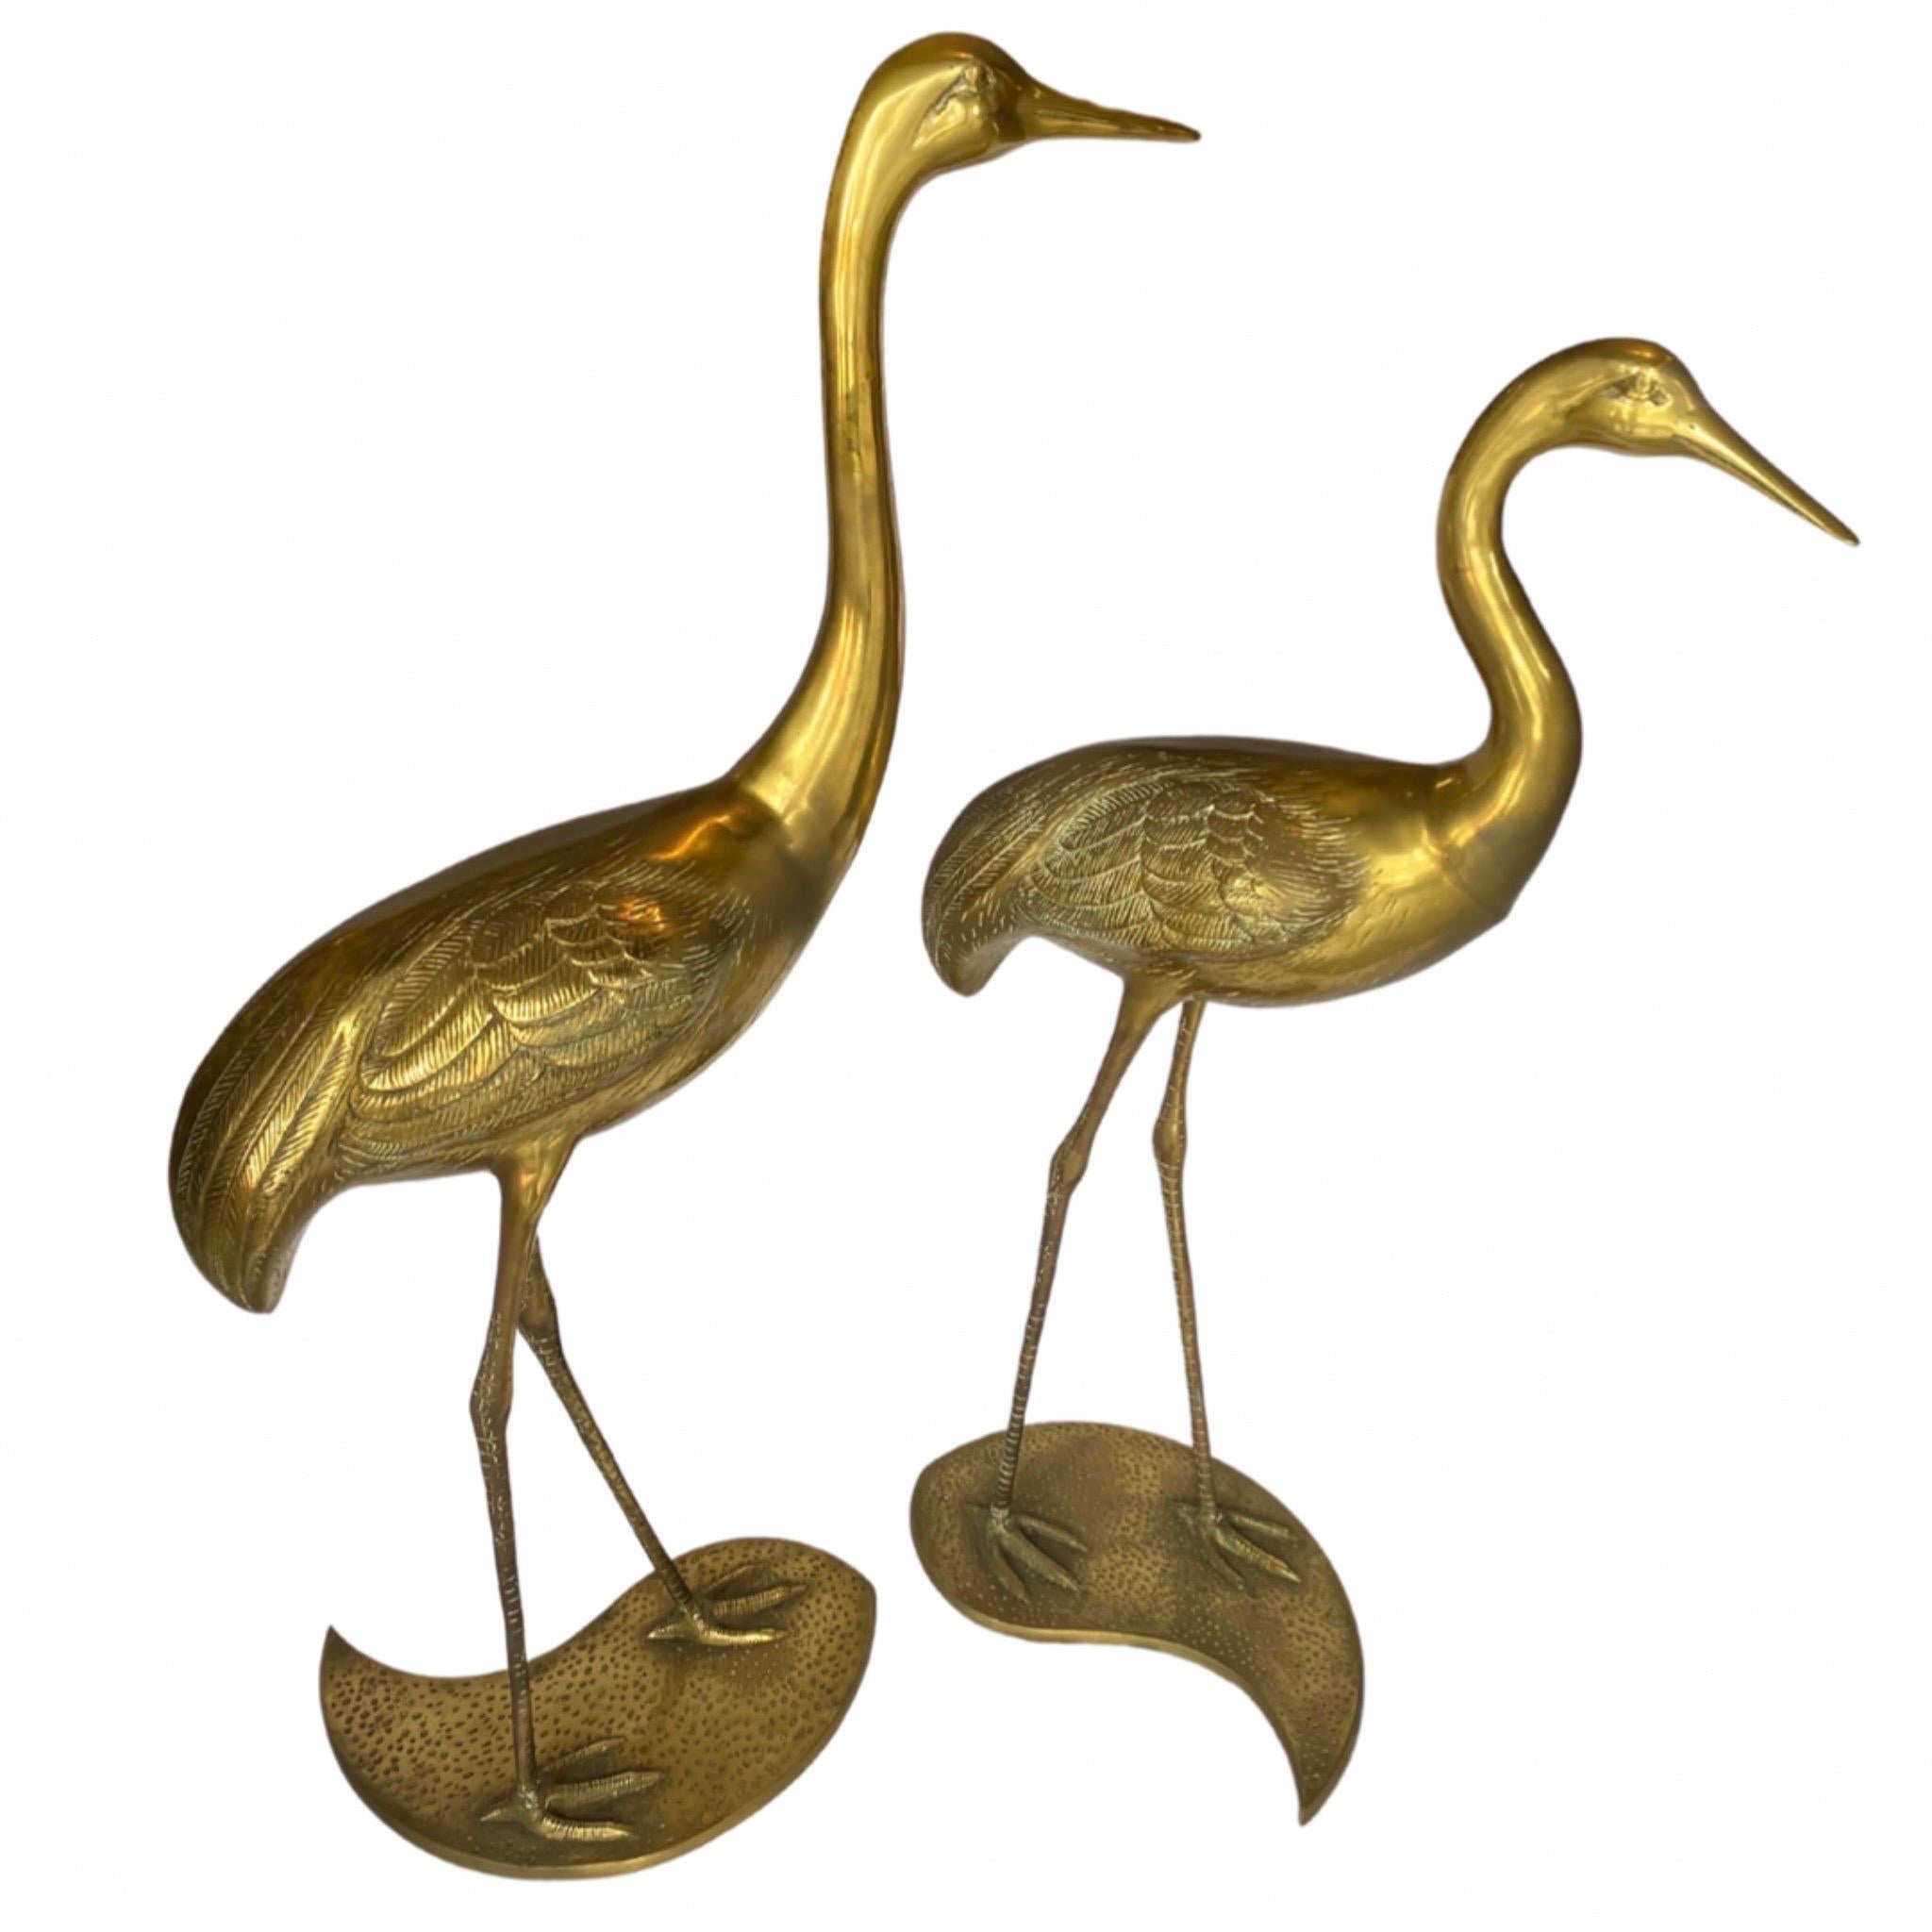 Two Brass Cranes with Nestling Bases, in the style of Hollywood Regency.

Fine Etching Details Thoughout.

Base has a “Yin & Yang” Shape.

Maison Jansen (Manufacturer).